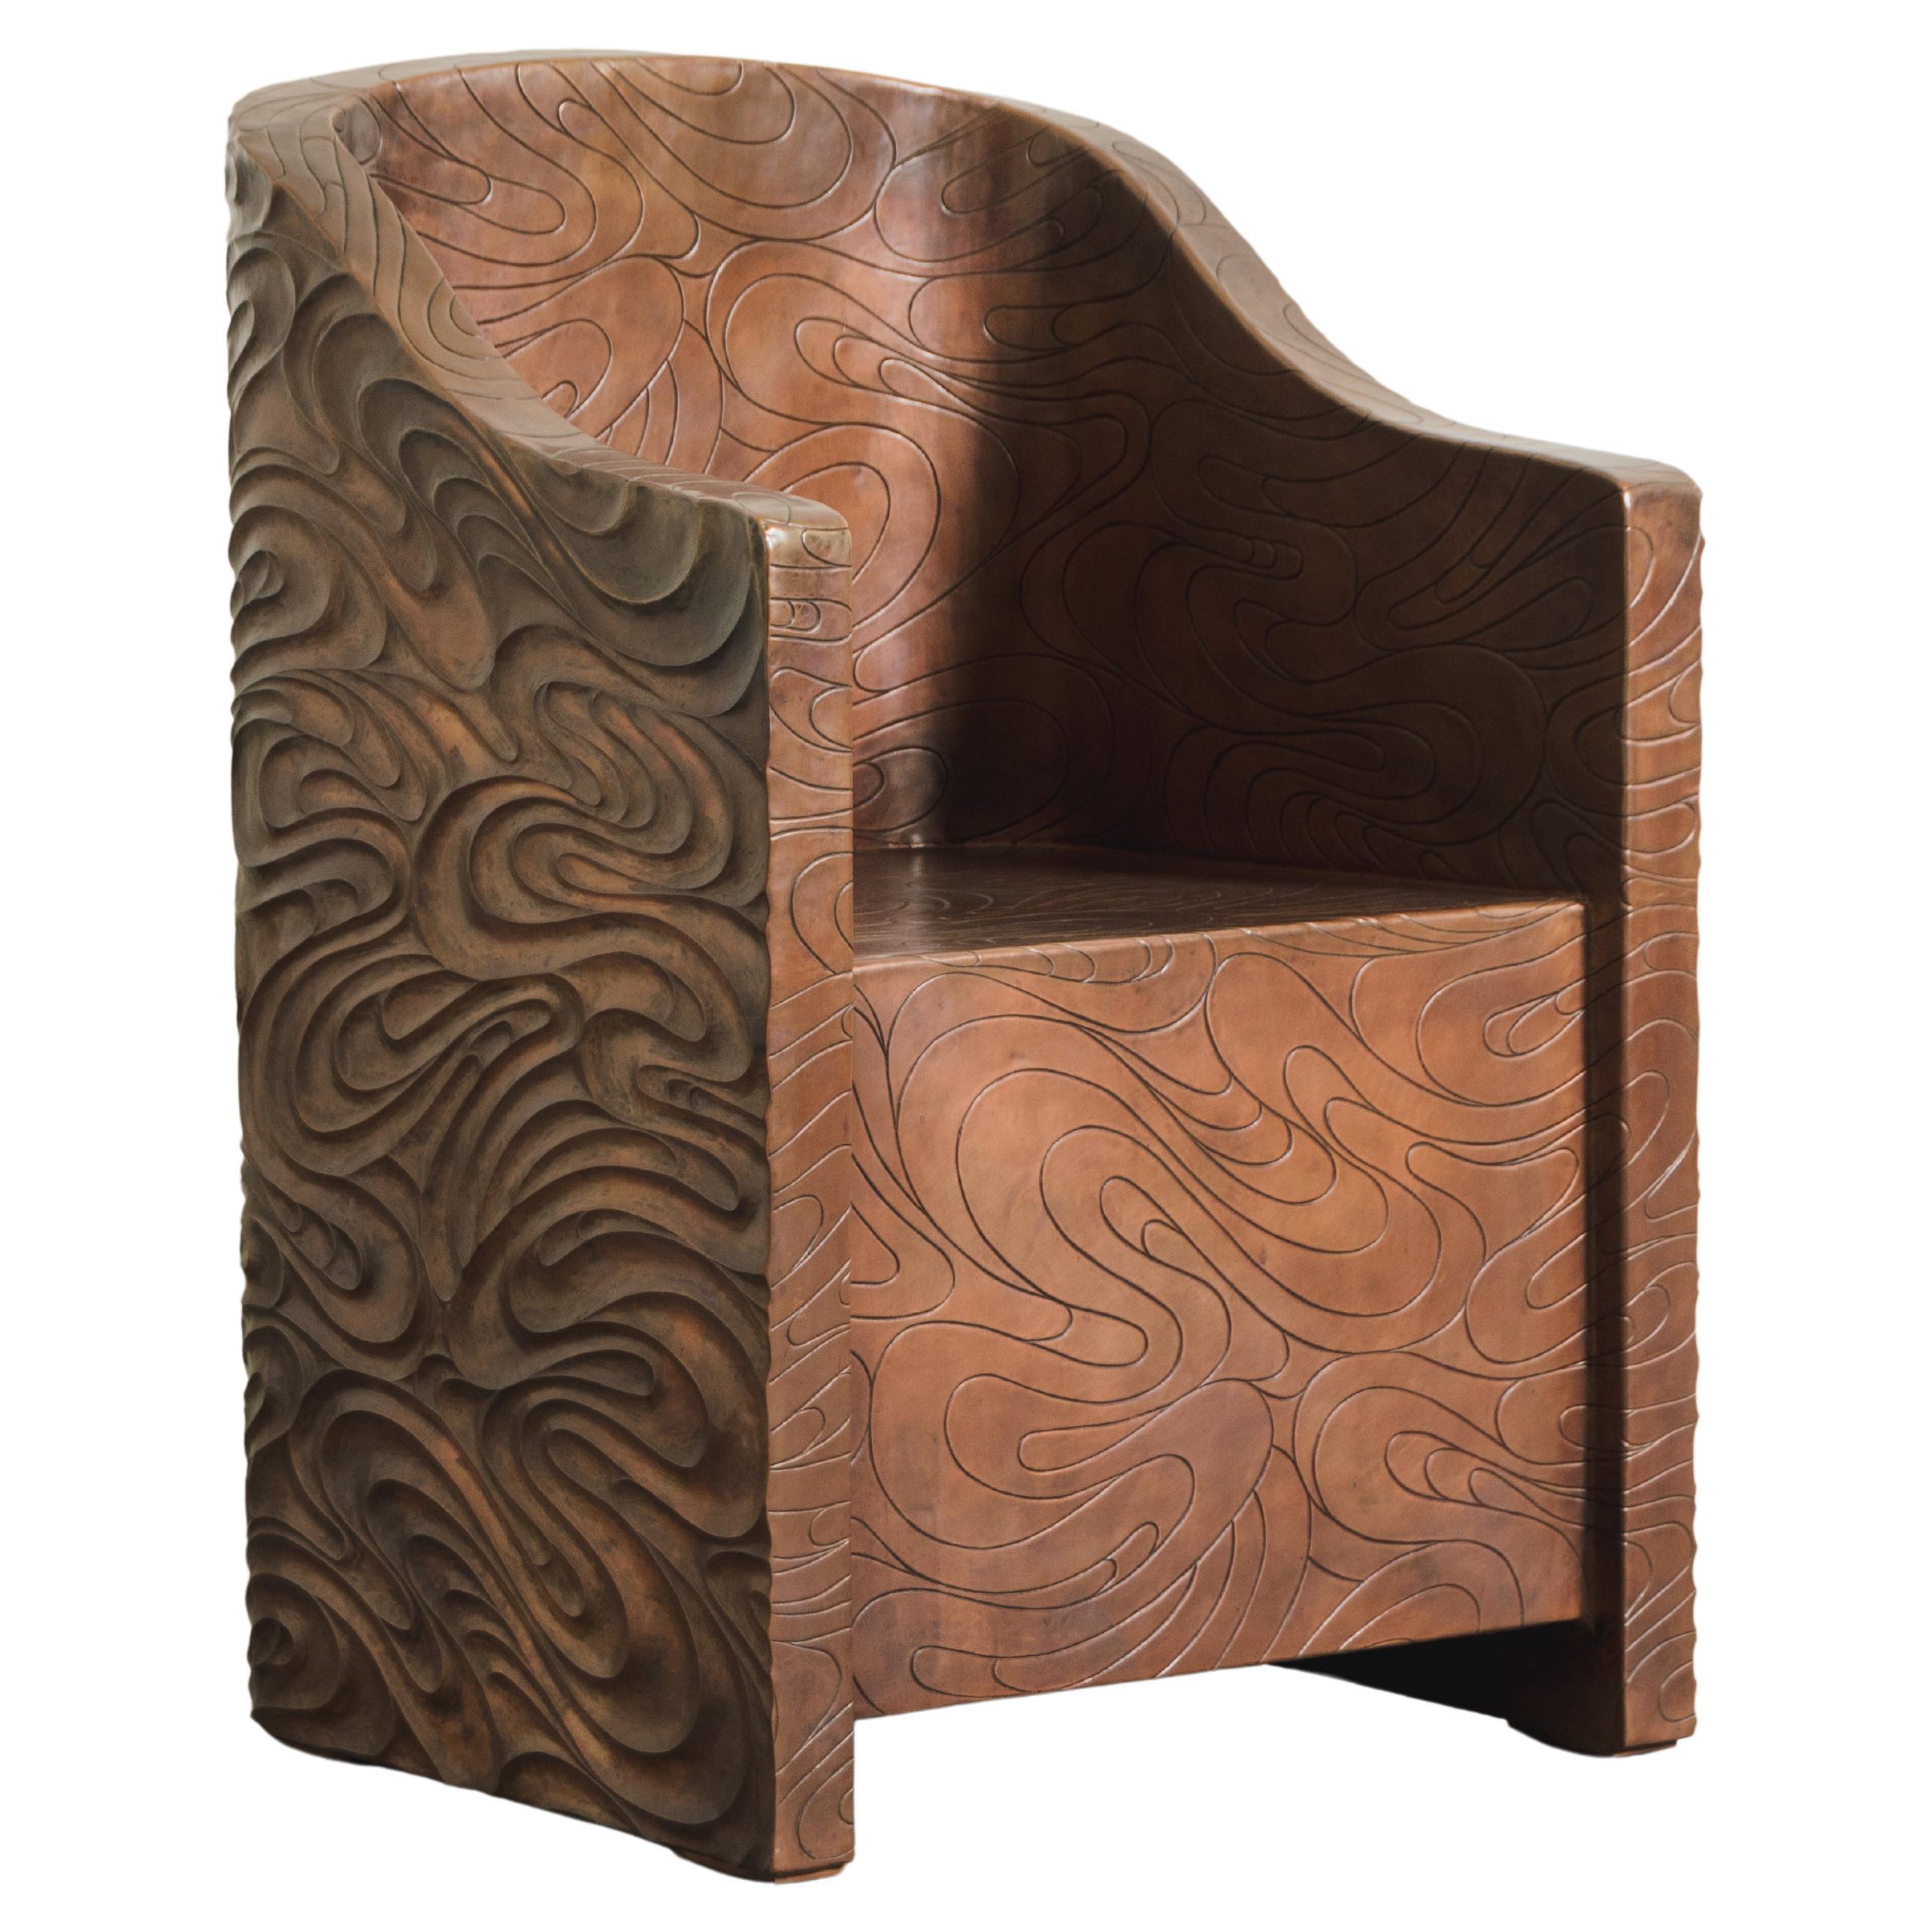 Contemporary Fei Tian Wen Chair in Repoussé Copper by Robert Kuo For Sale